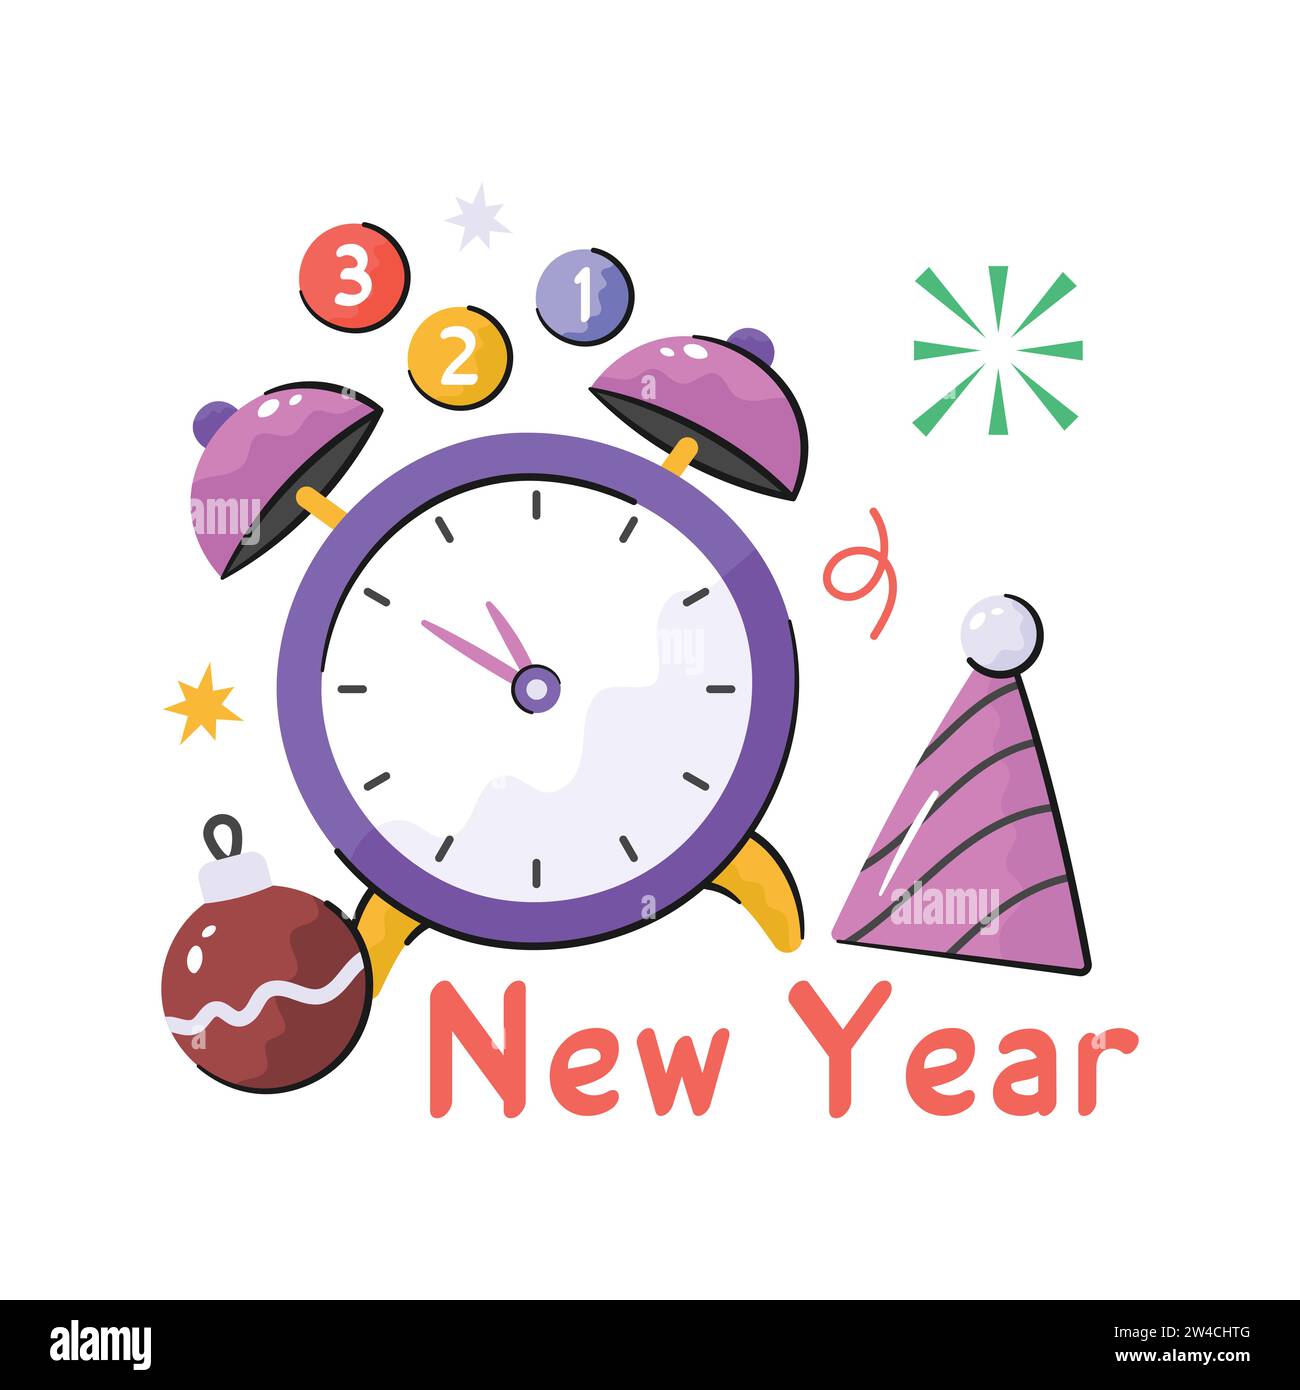 New Year's Eve 2024 Countdown Celebration and Party Concept with